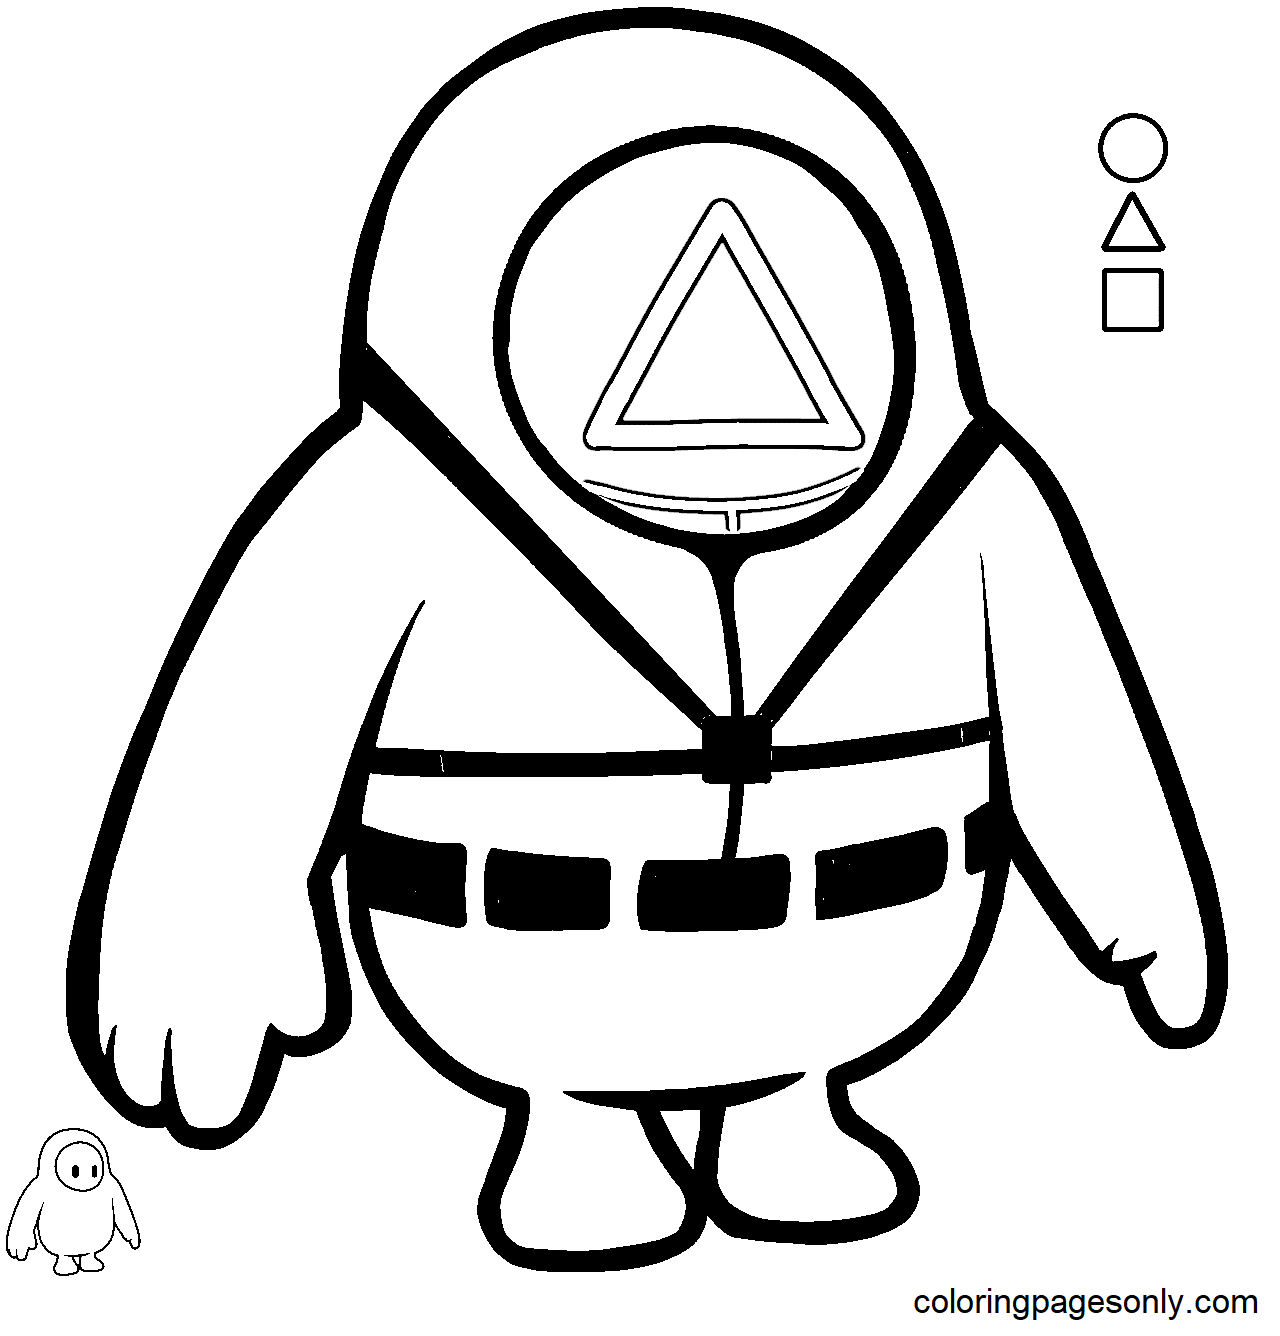 Cute Squid Game Triangle Guard Coloring Pages